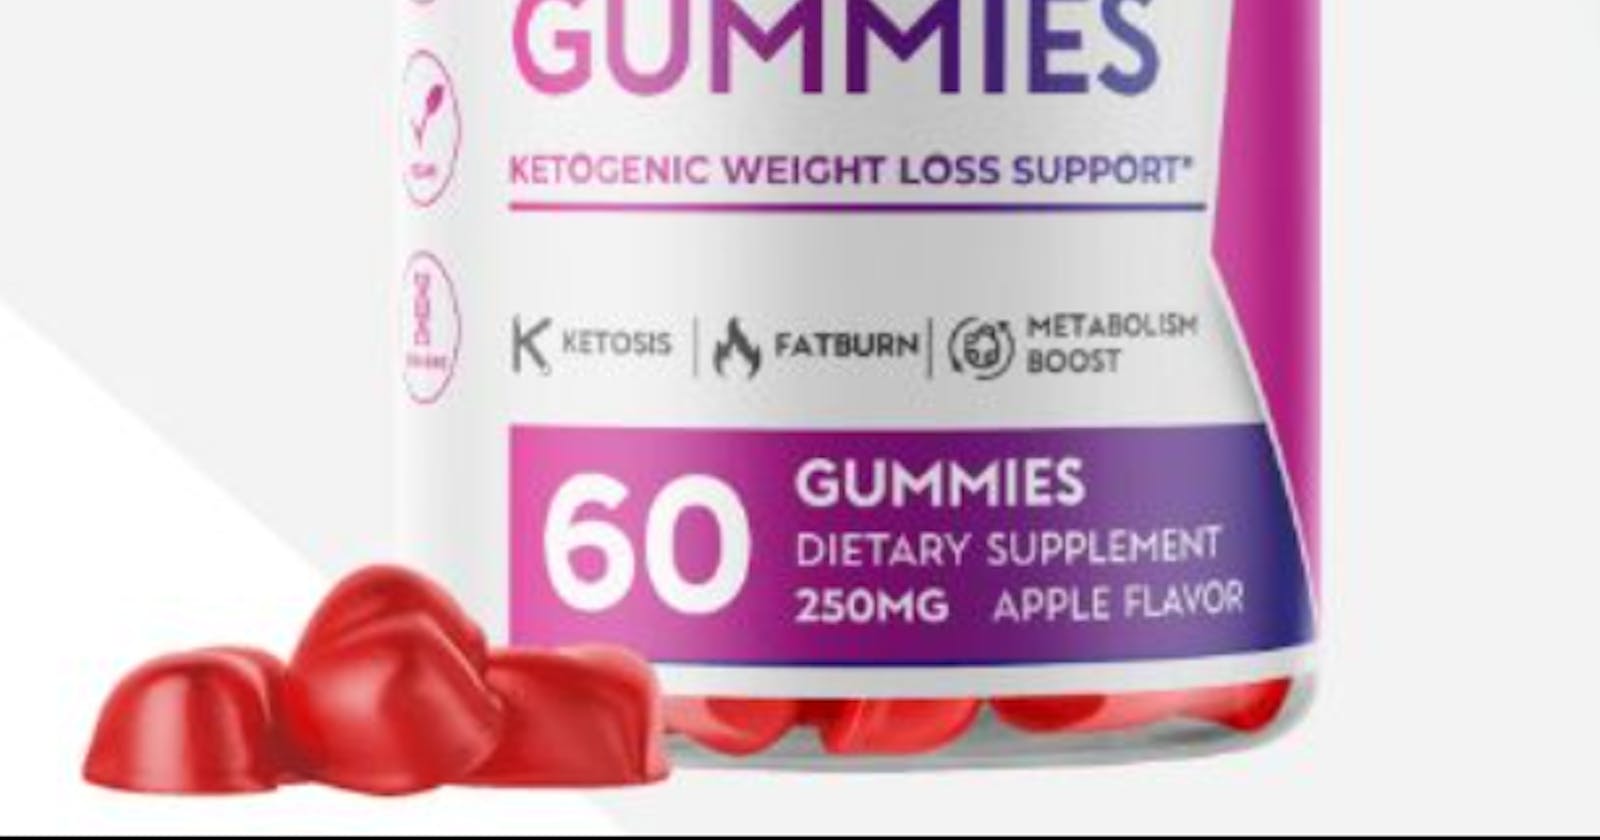 Summer Keto ACV Gummies UK Weight Loss Supplement To Improve Health! Latest 2023?